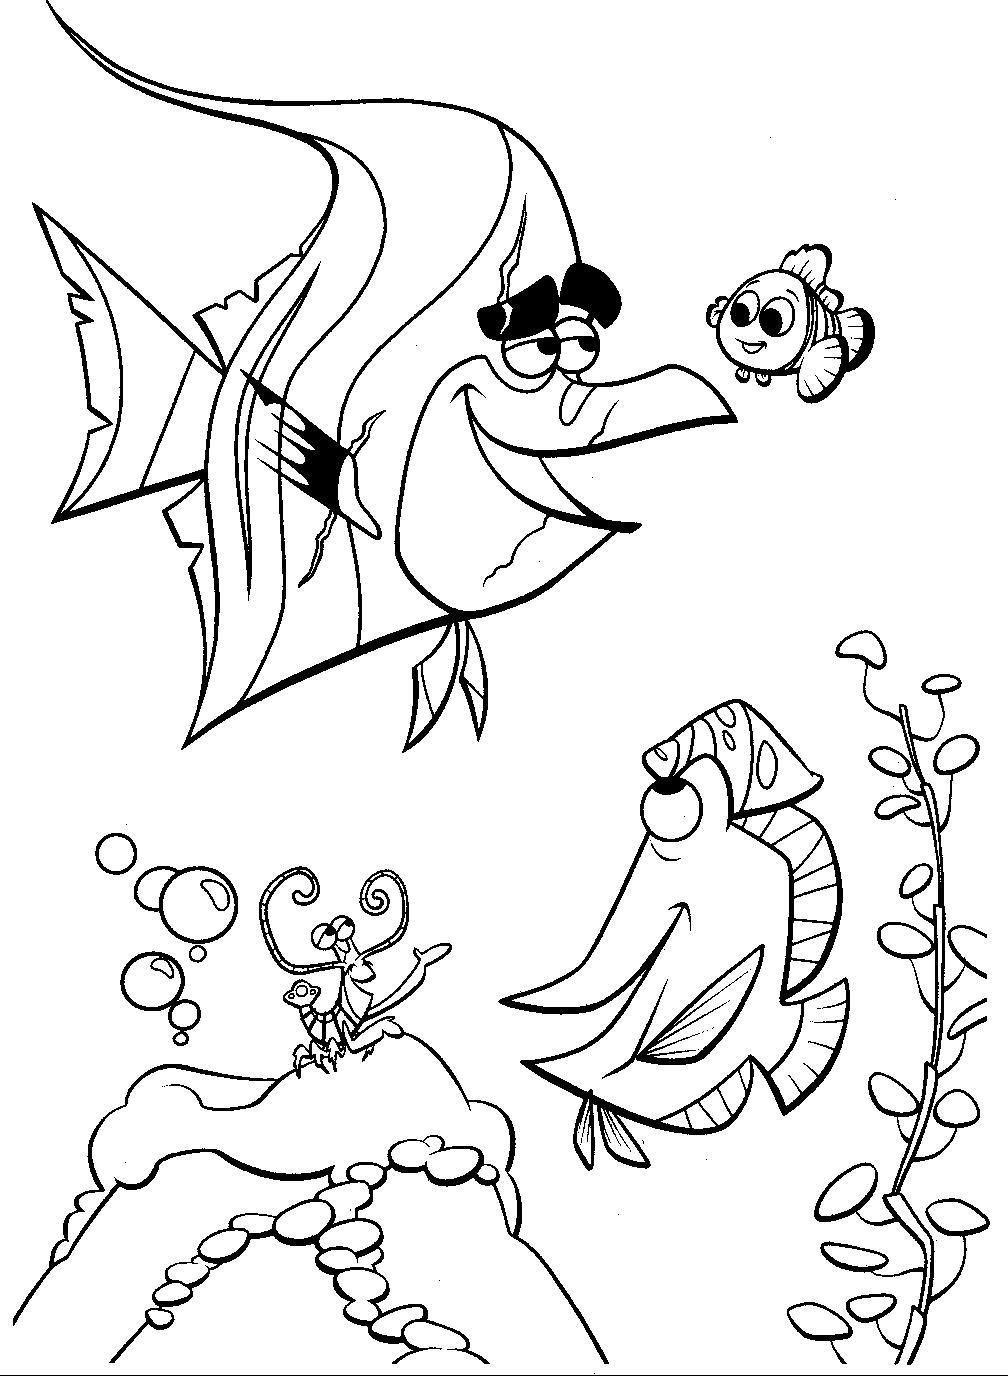 krafty-kidz-center-finding-nemo-coloring-pages